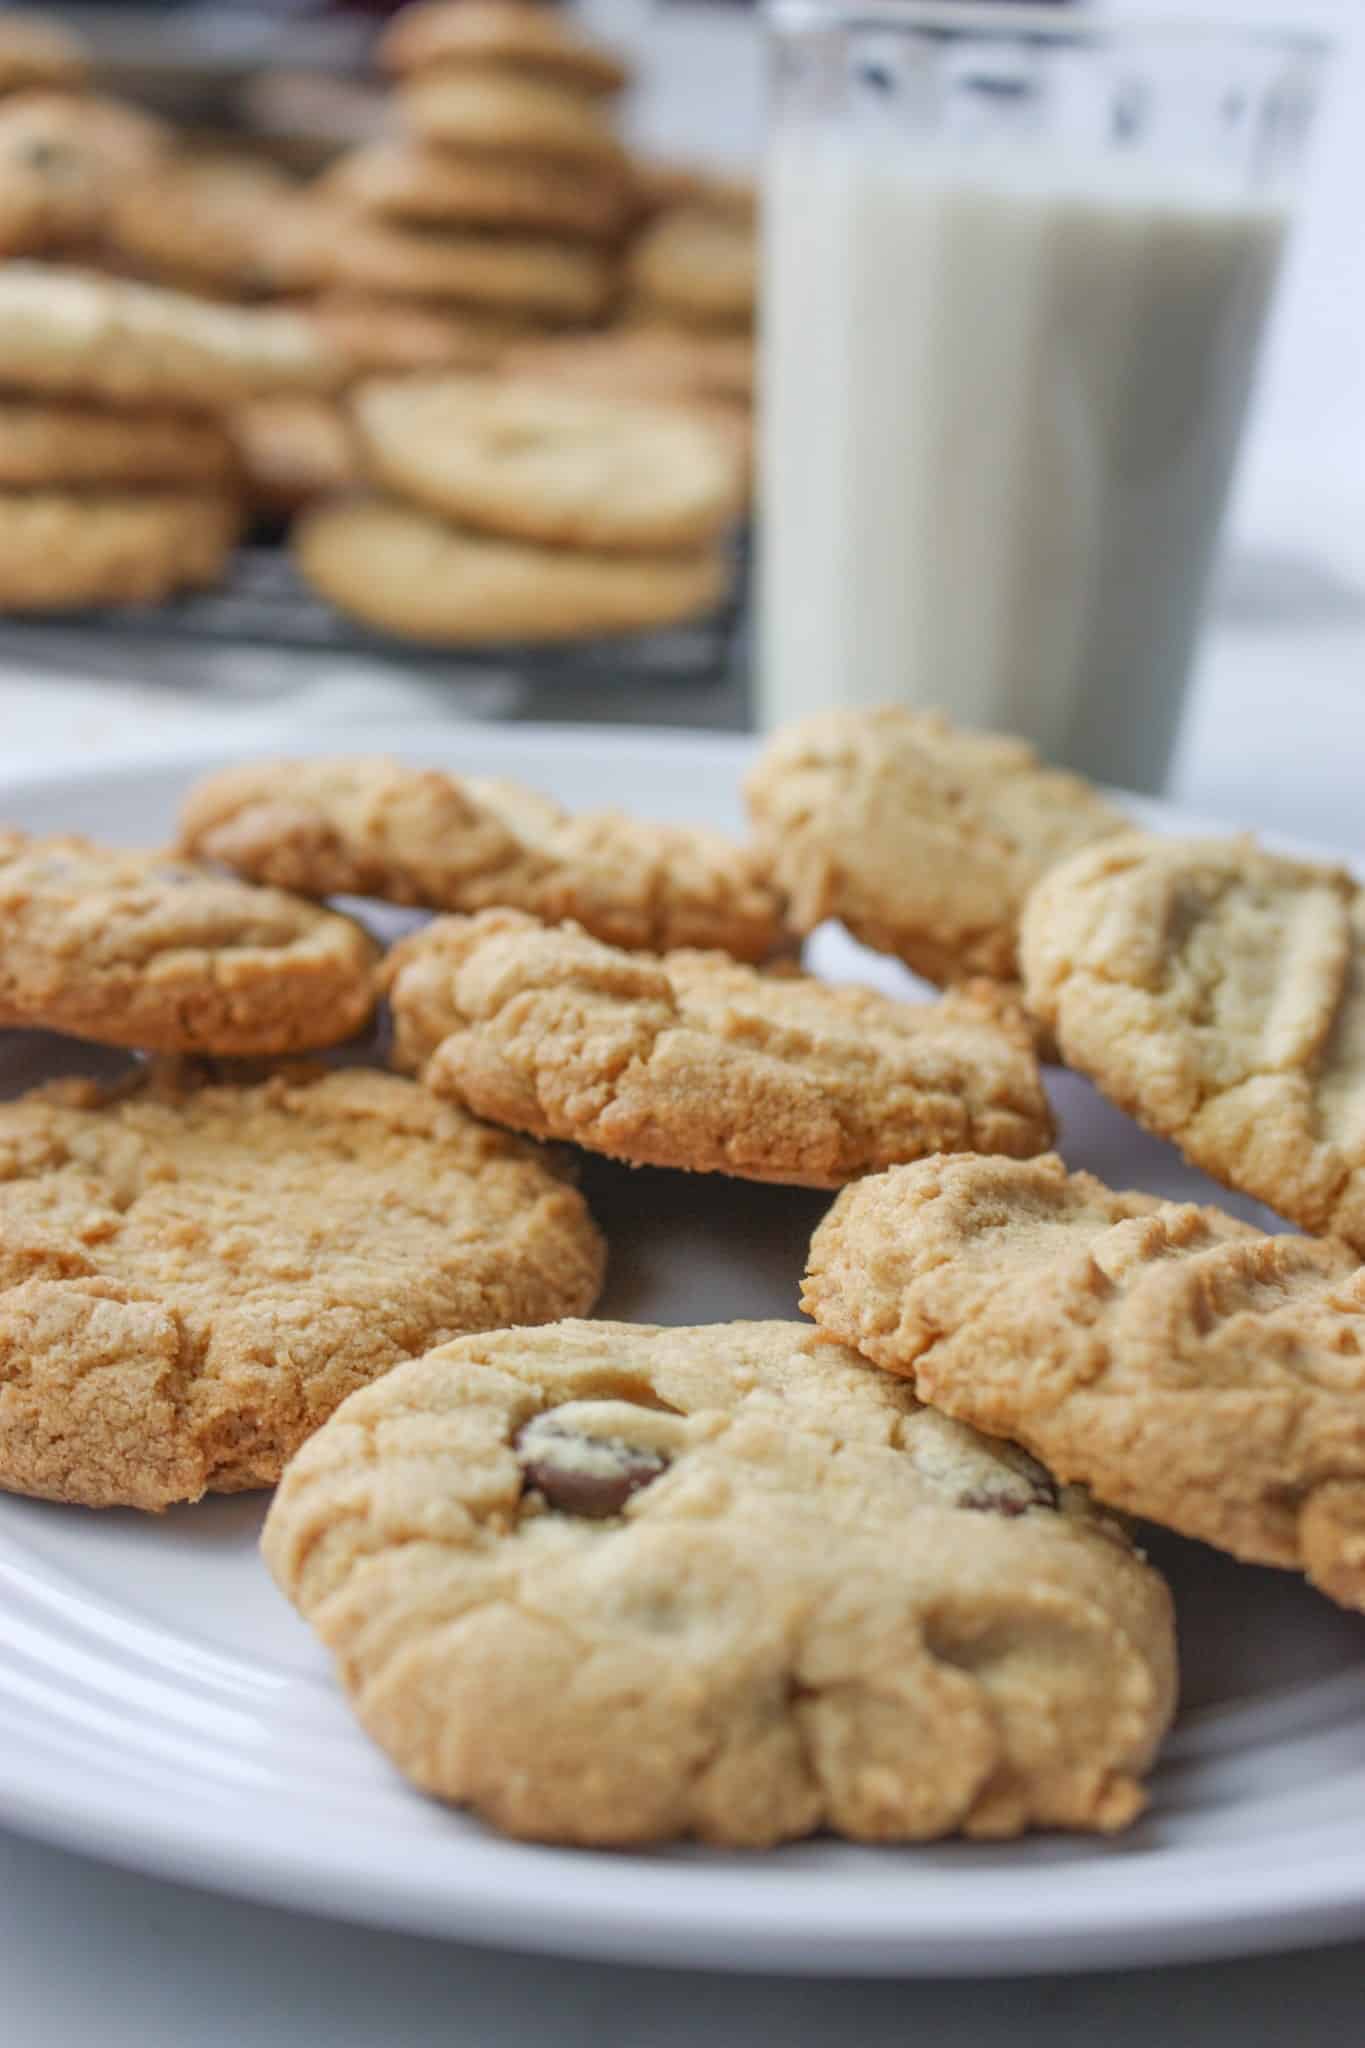 Peanut Butter Cookies 1 to 1 Flour is an easy gluten free cookie recipe.  These cookies are the perfect dessert for peanut butter lovers because they incorporate natual peanut butter to get that true peanut taste!